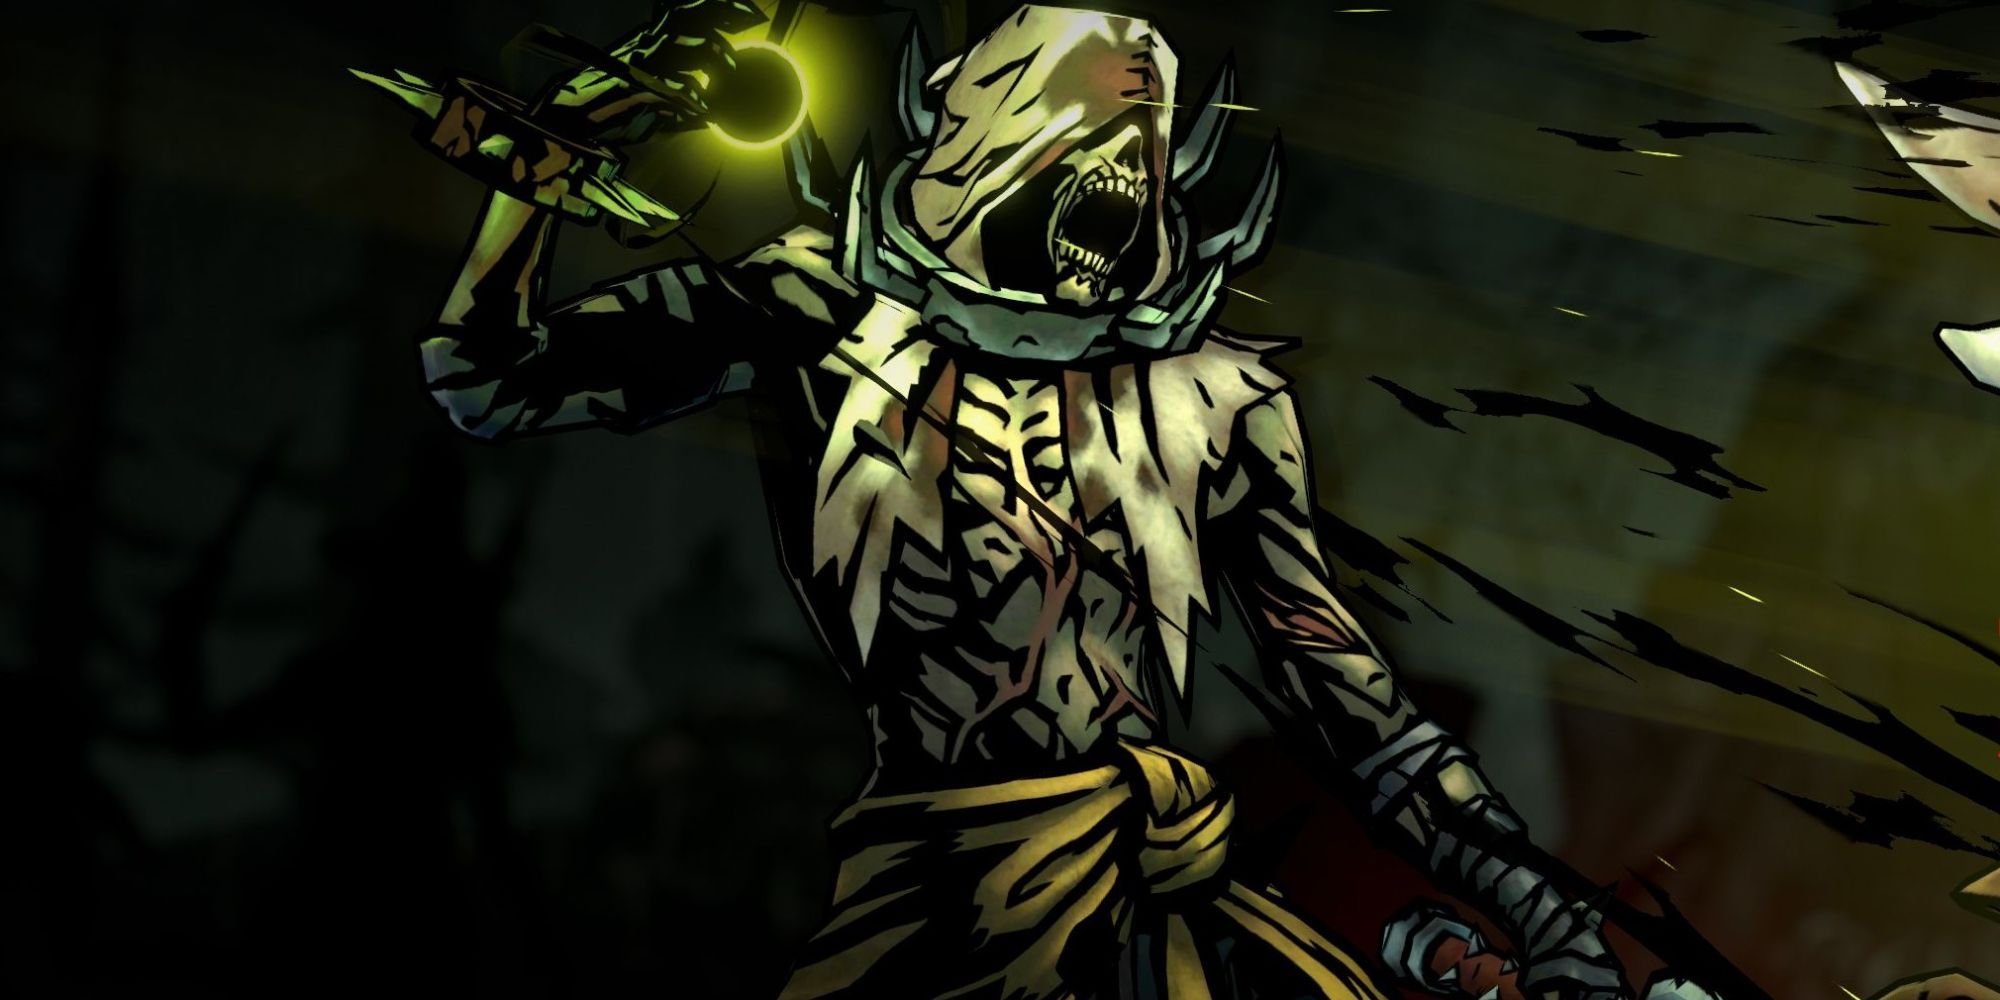 Flagelant draws the energy of the malfunction in Darkest Dungeon 2.